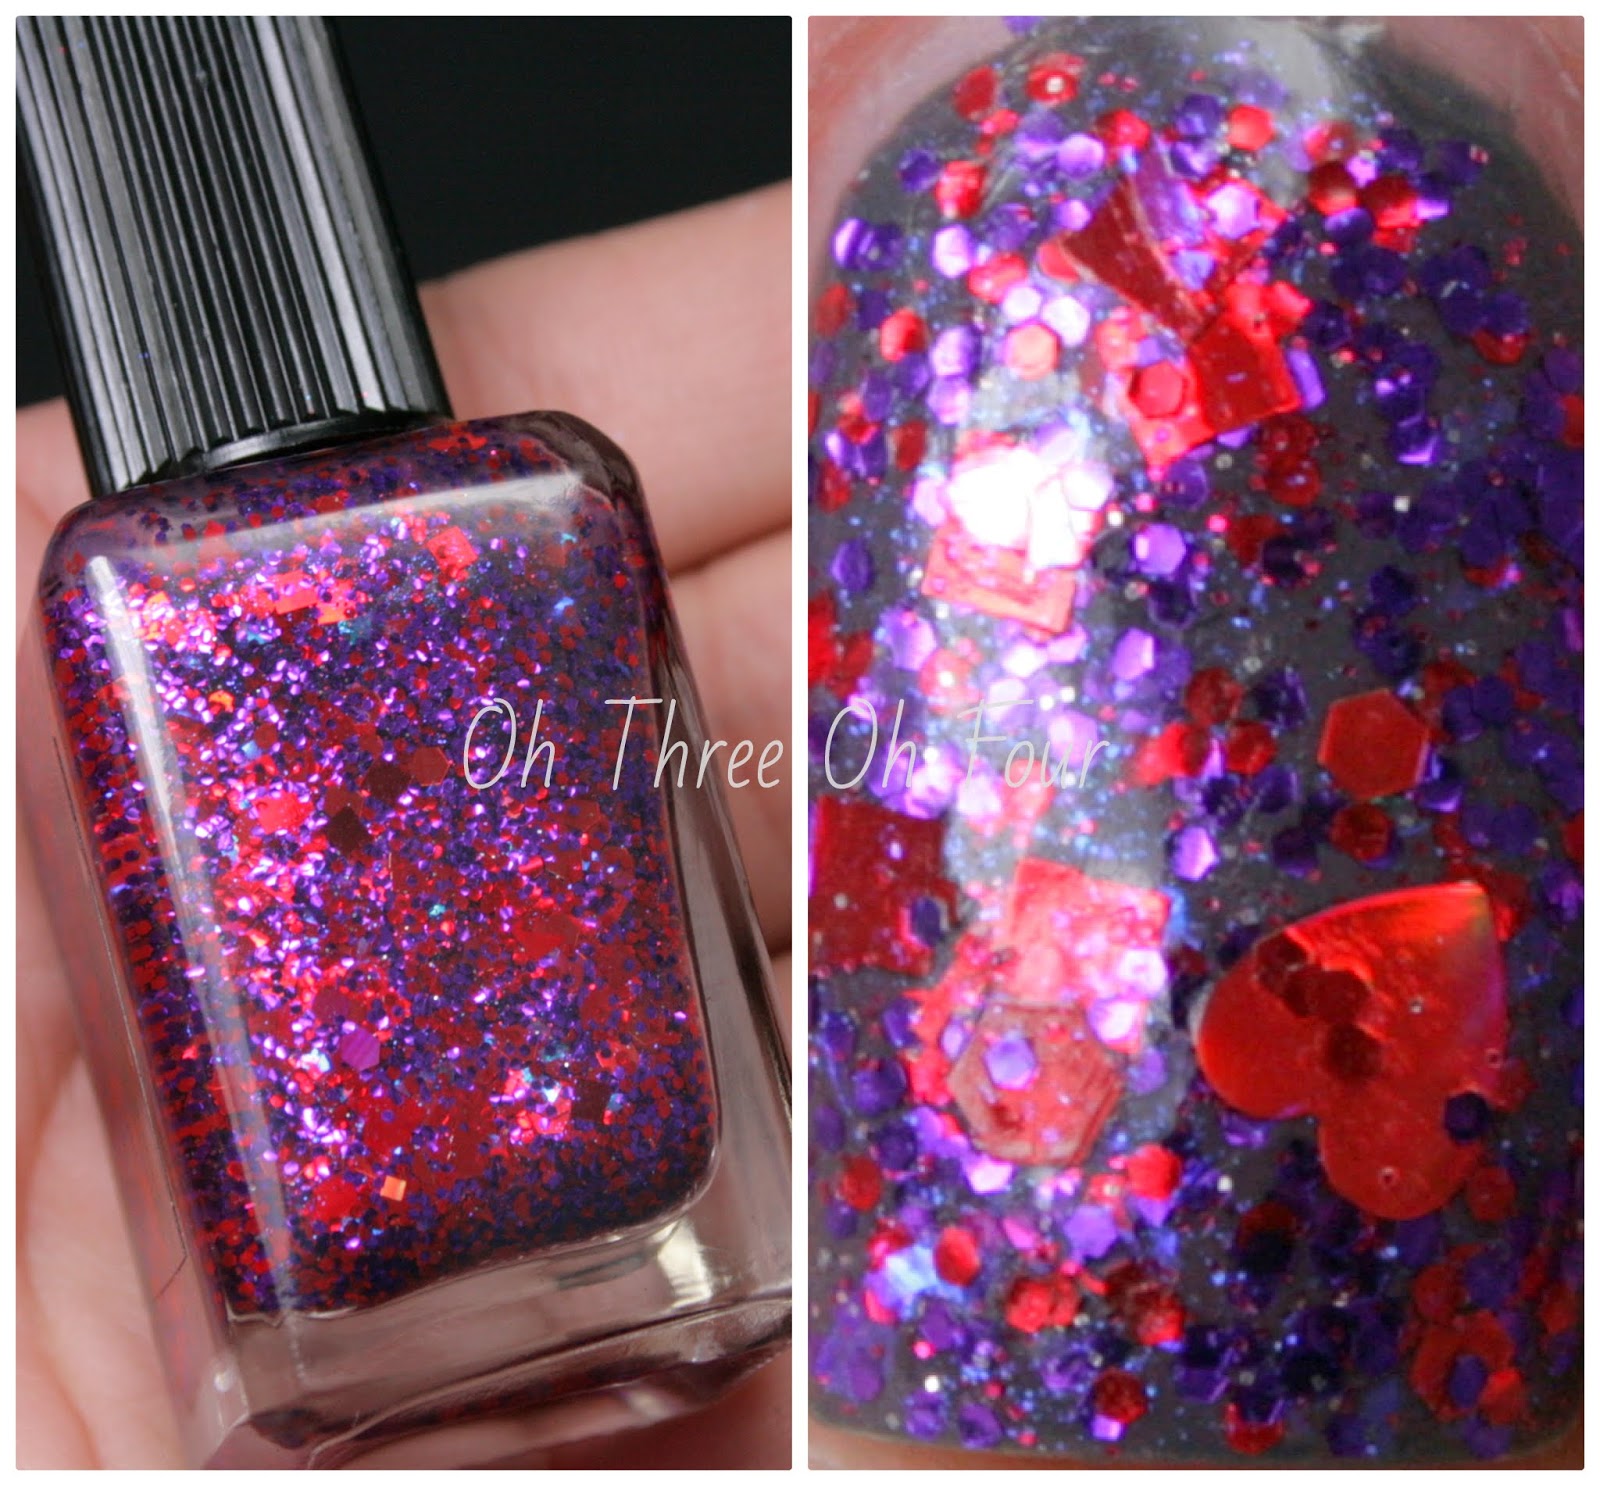 Oh Three Oh Four: Lynnderella Love You!, Parfait d'Amour and Sugared Violet